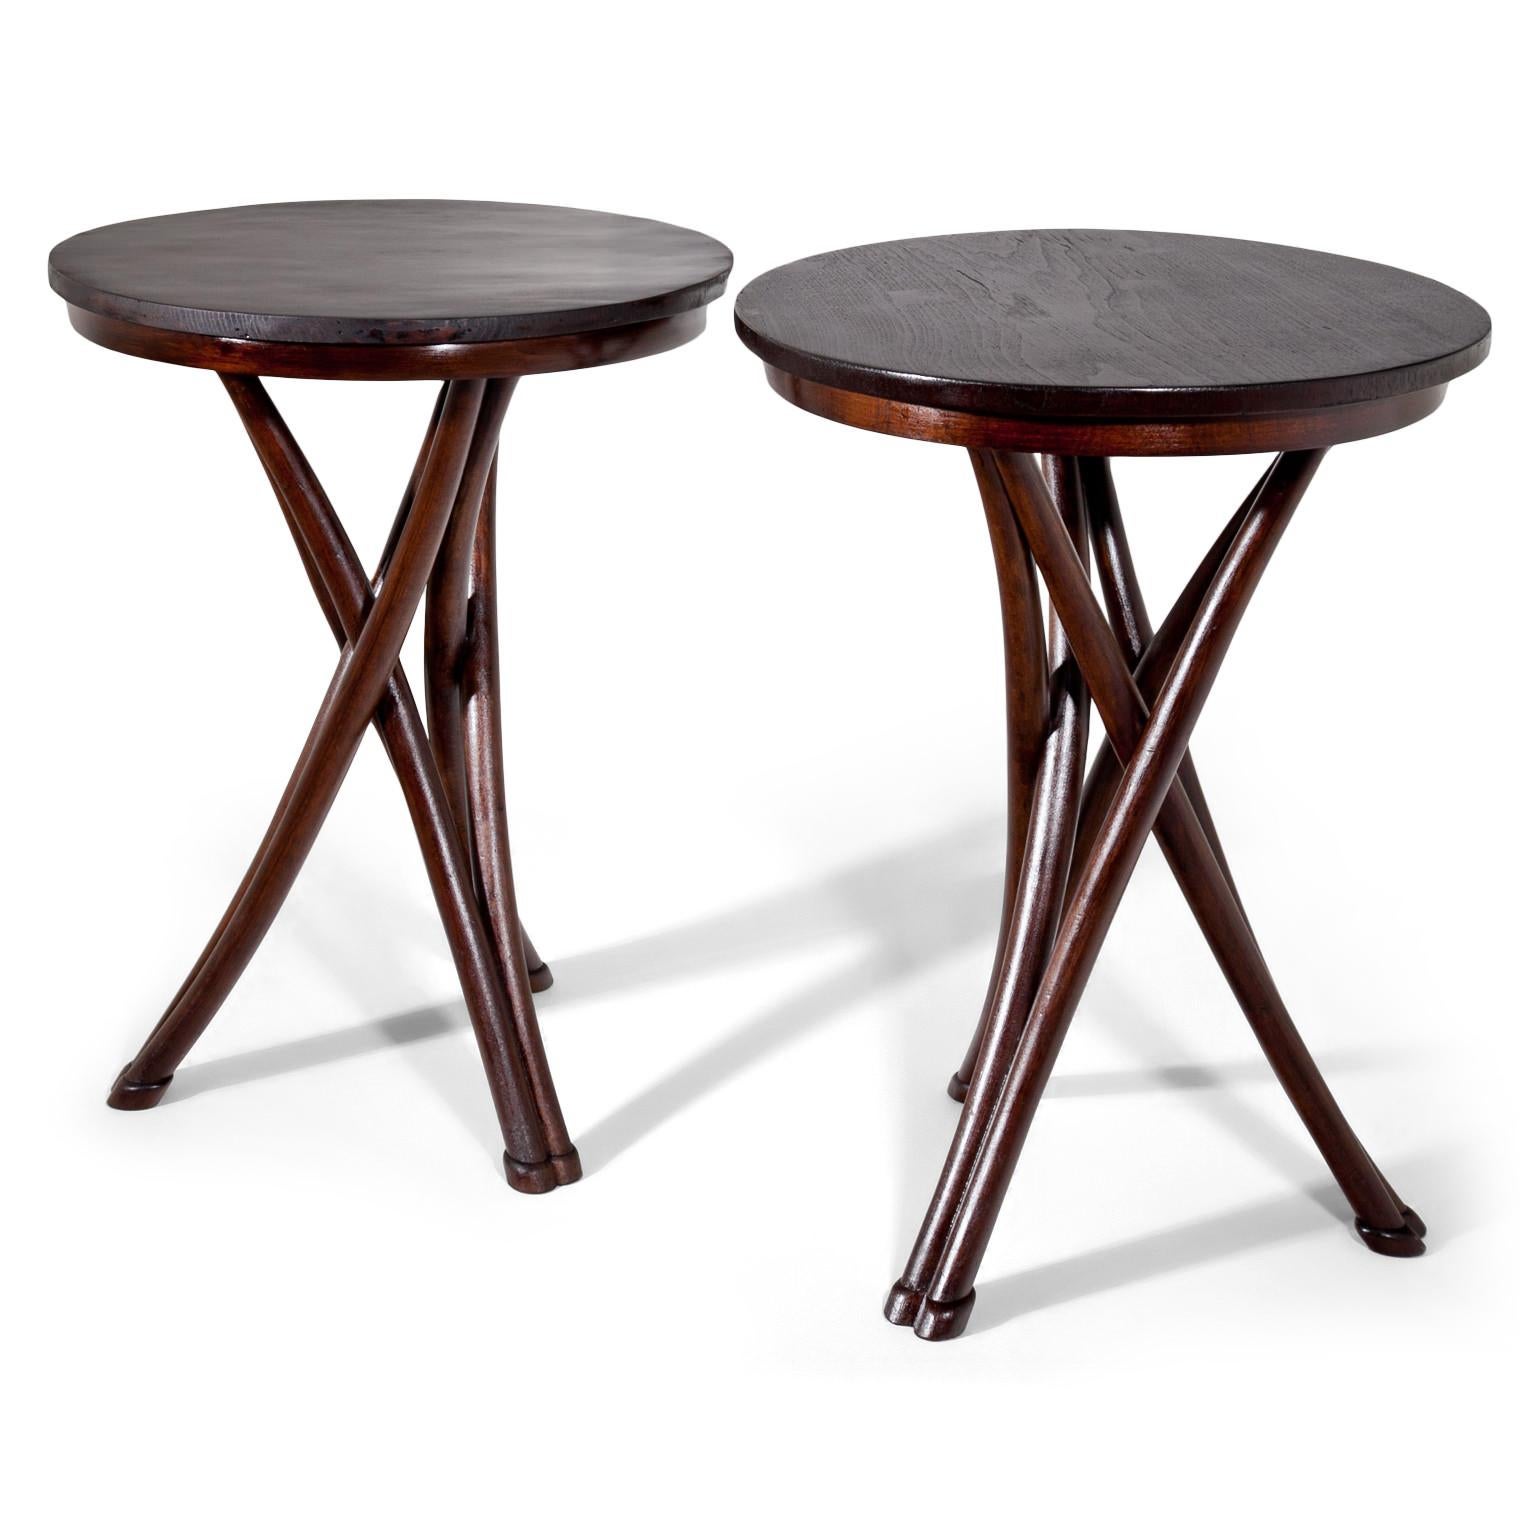 Two game tables No. 13 with slightly different heights (77 and 75.5 cm) and round table tops as well as crossed legs out of bentwood. These are a near pair and the table tops are restored. Both are stamped THONET. Lit: Peter W. Ellenberg: Gebrüder